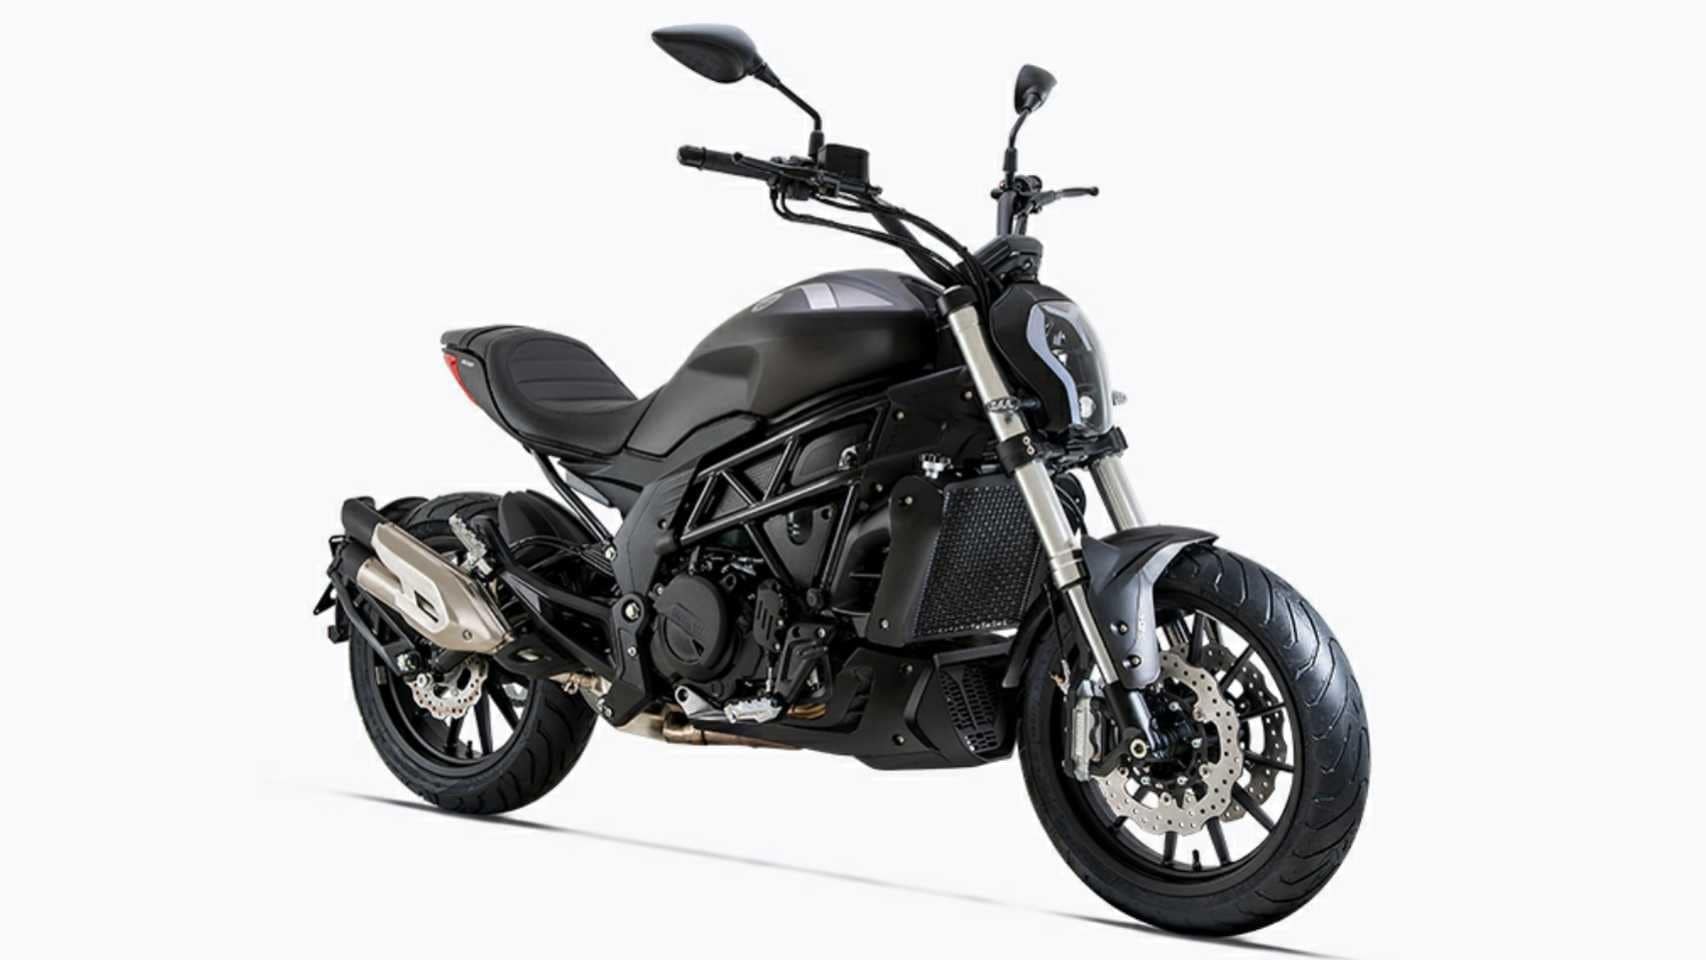 The Benelli 502C derives clear design inspiration from the Ducati Diavel. Image: Benelli